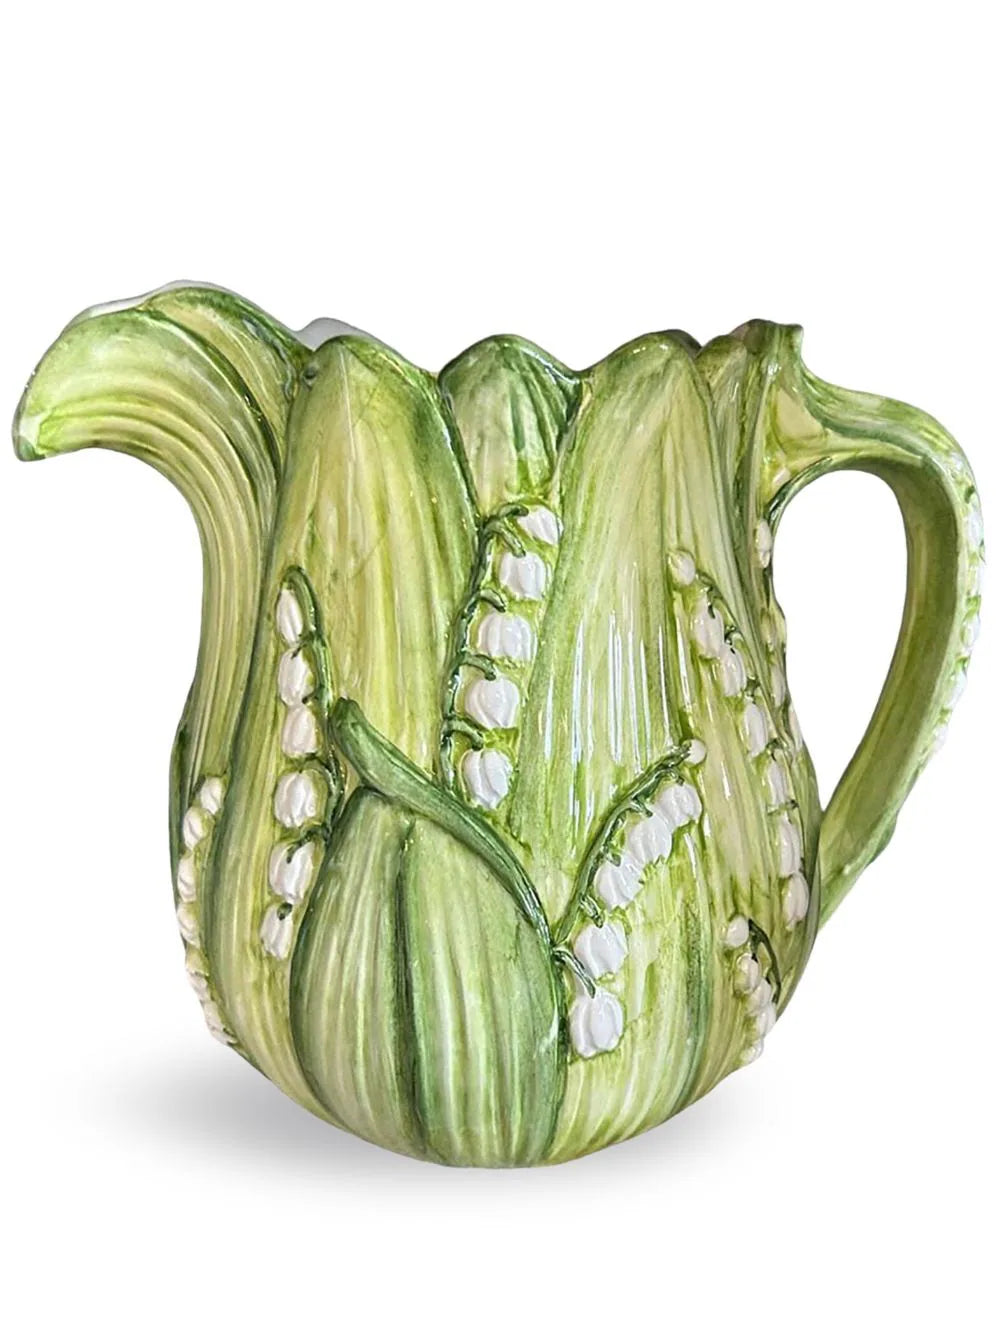 LES OTTOMANS Lily of the Valley Ceramic Jug